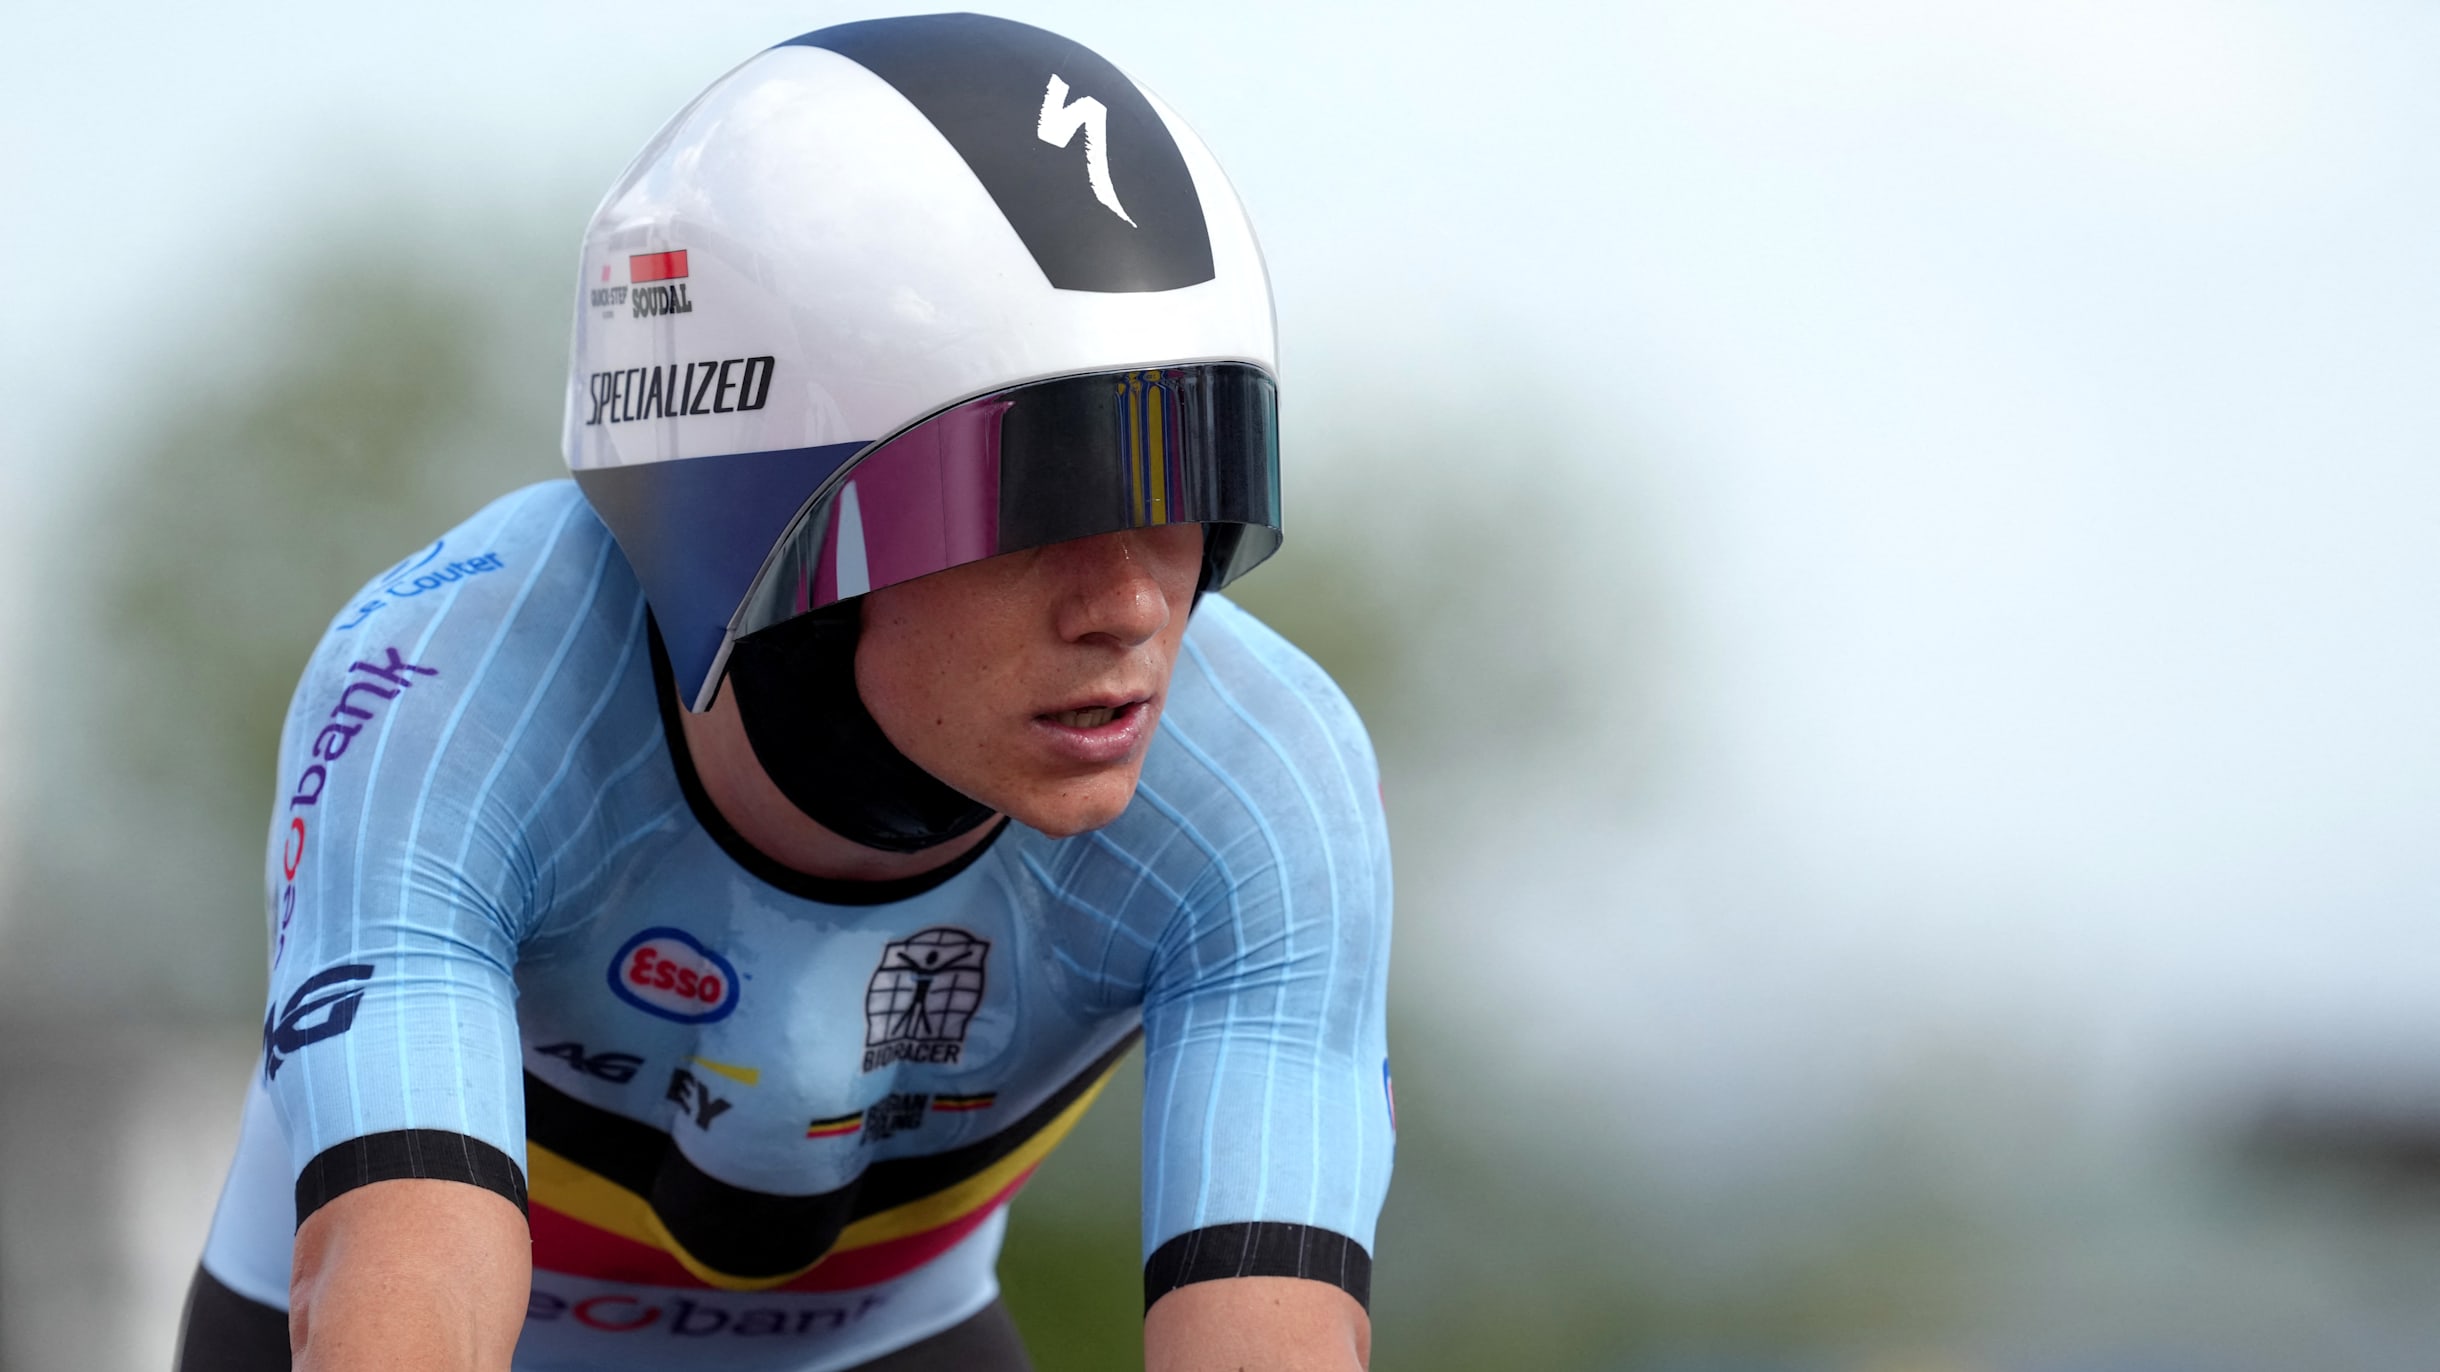 Evenepoel Wins UCI World Championships Road Race   - Pro  cycling news, race results, tests, interviews